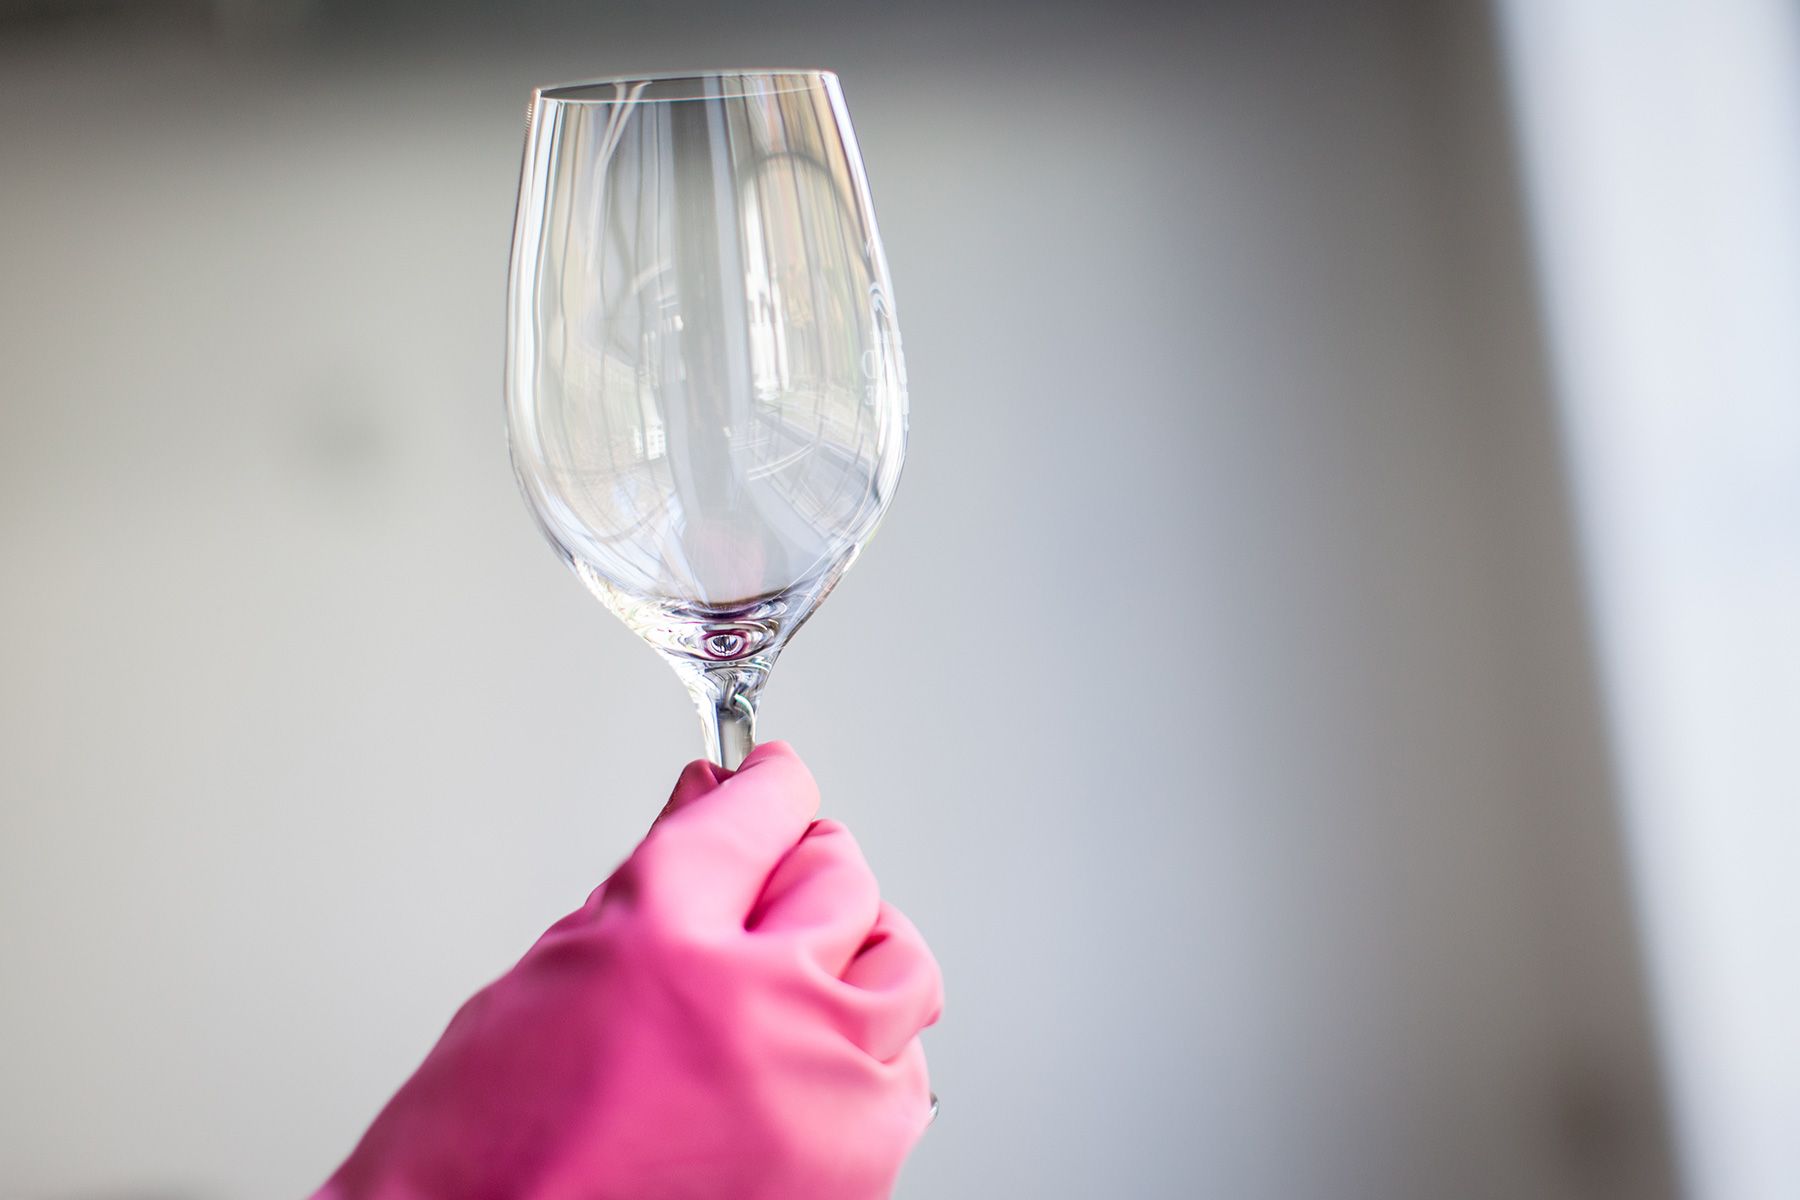 How To Clean Wine-Stained Crystal Glasses